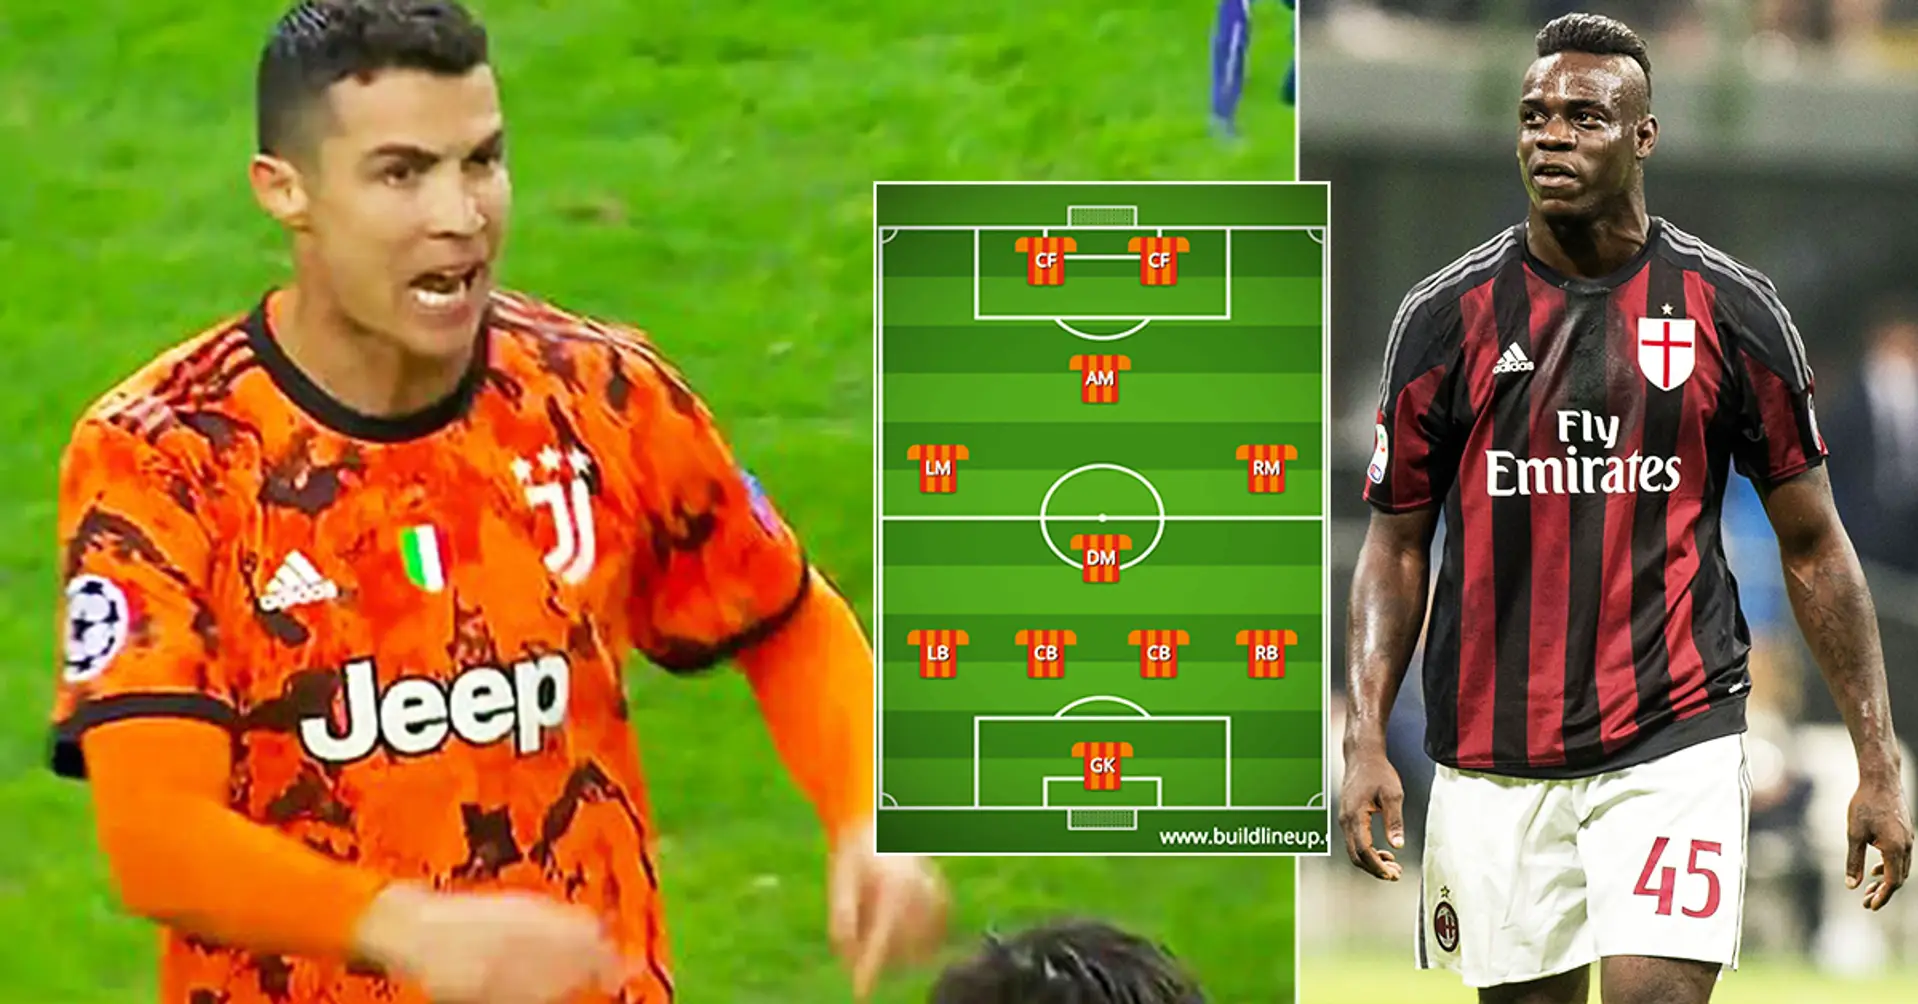 'I left Cristiano out'. Mario Balotelli names his Ultimate XI with some surpirising picks